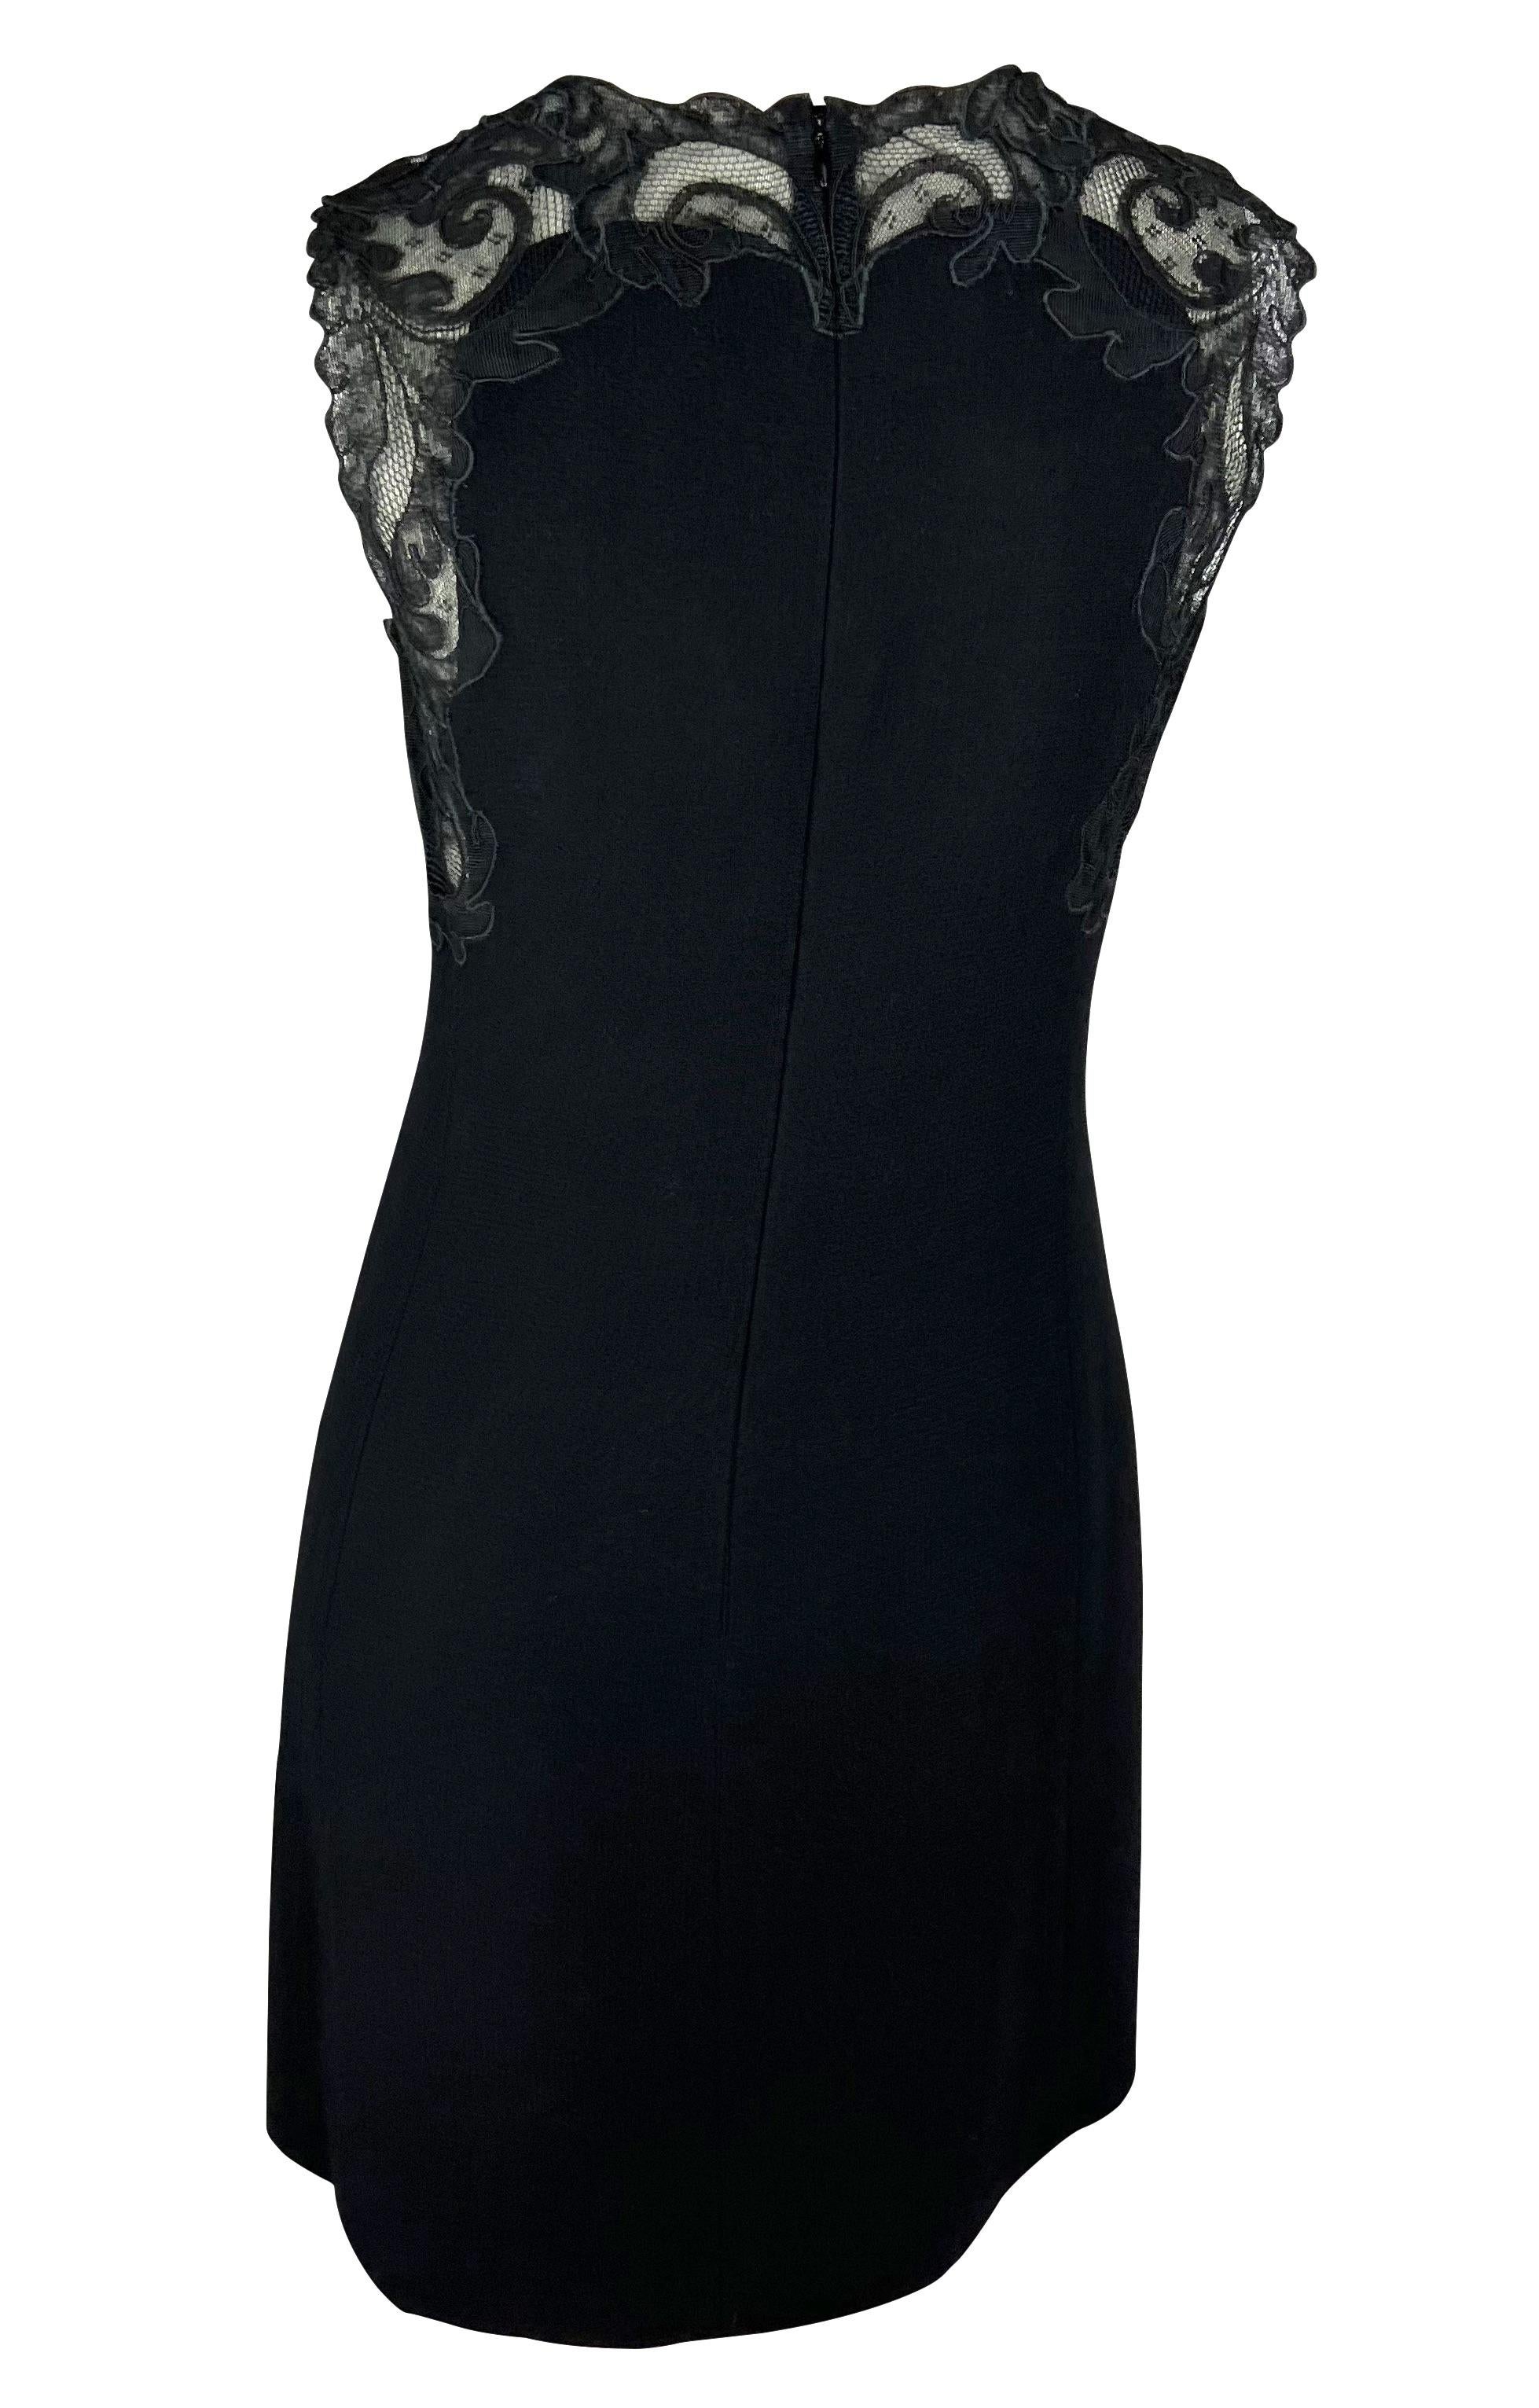 Women's F/W 1996 Gianni Versace Couture Black Lace Bust Wool Stretch Dress For Sale